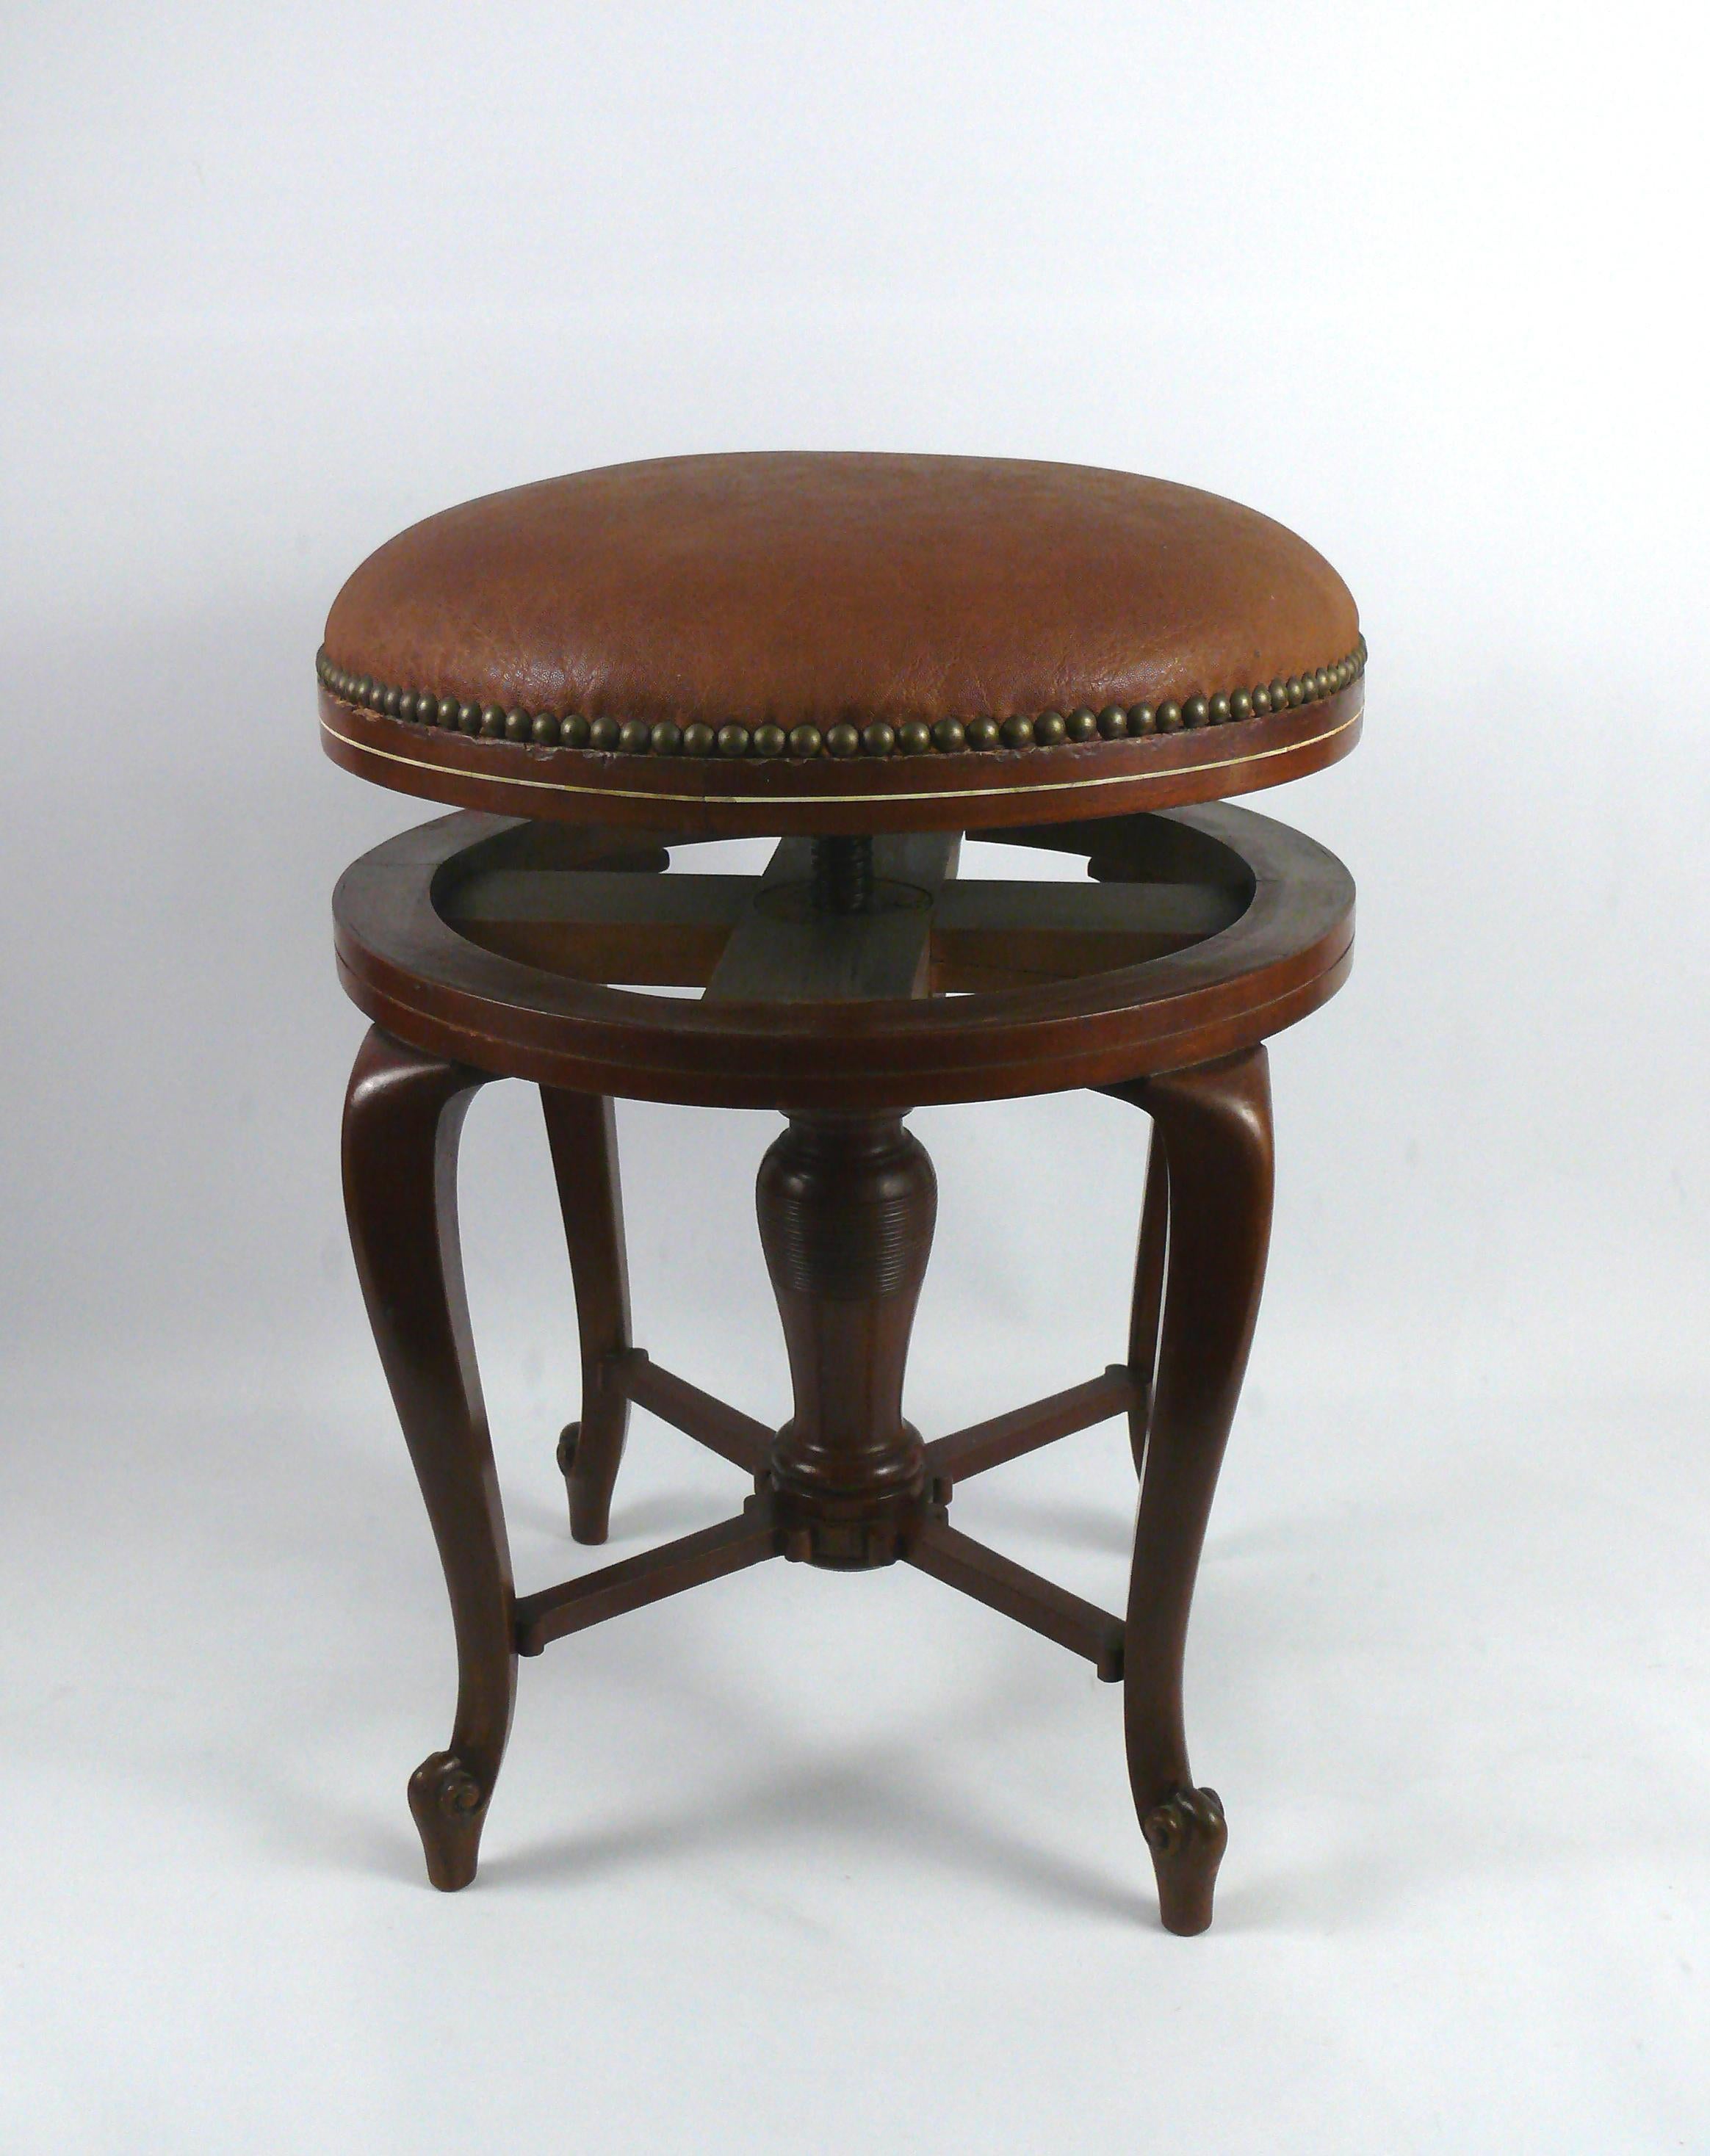 German Upholstered Piano Stool / Swivel Stool, Chippendale Style